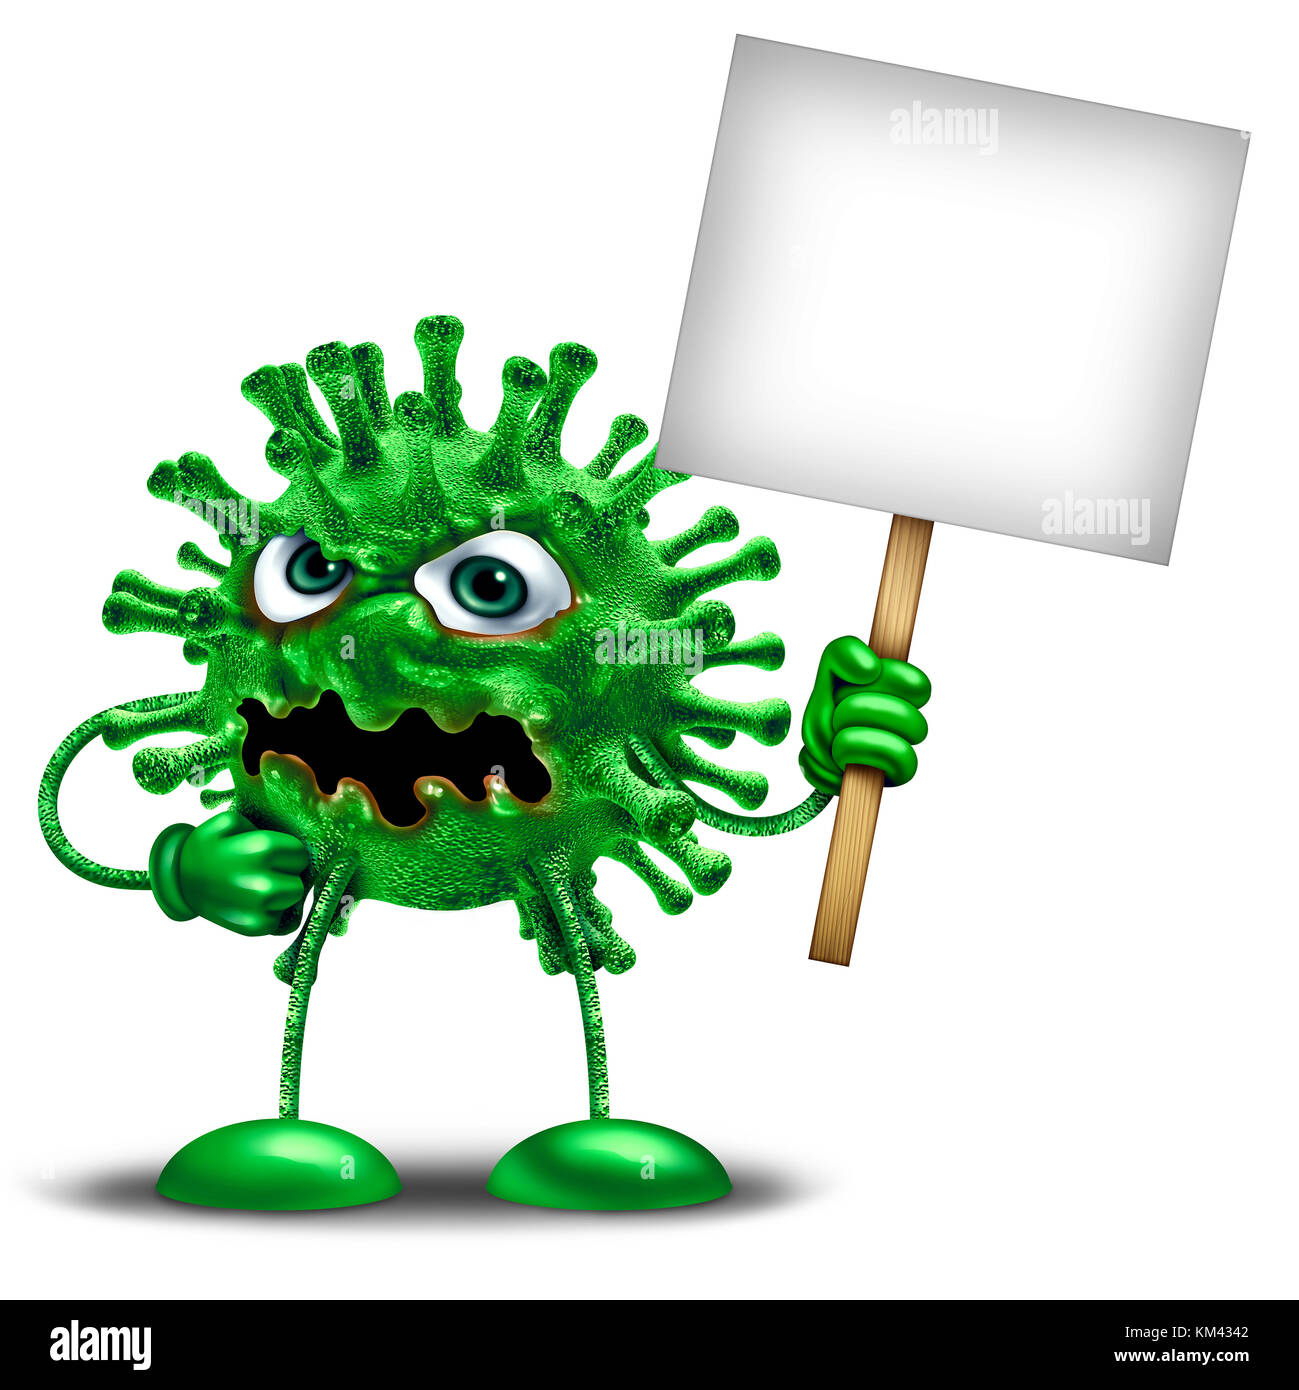 Disease character with blank sign as a virus holding a billboard as a green monster health medicine or medical pathology symbol. Stock Photo